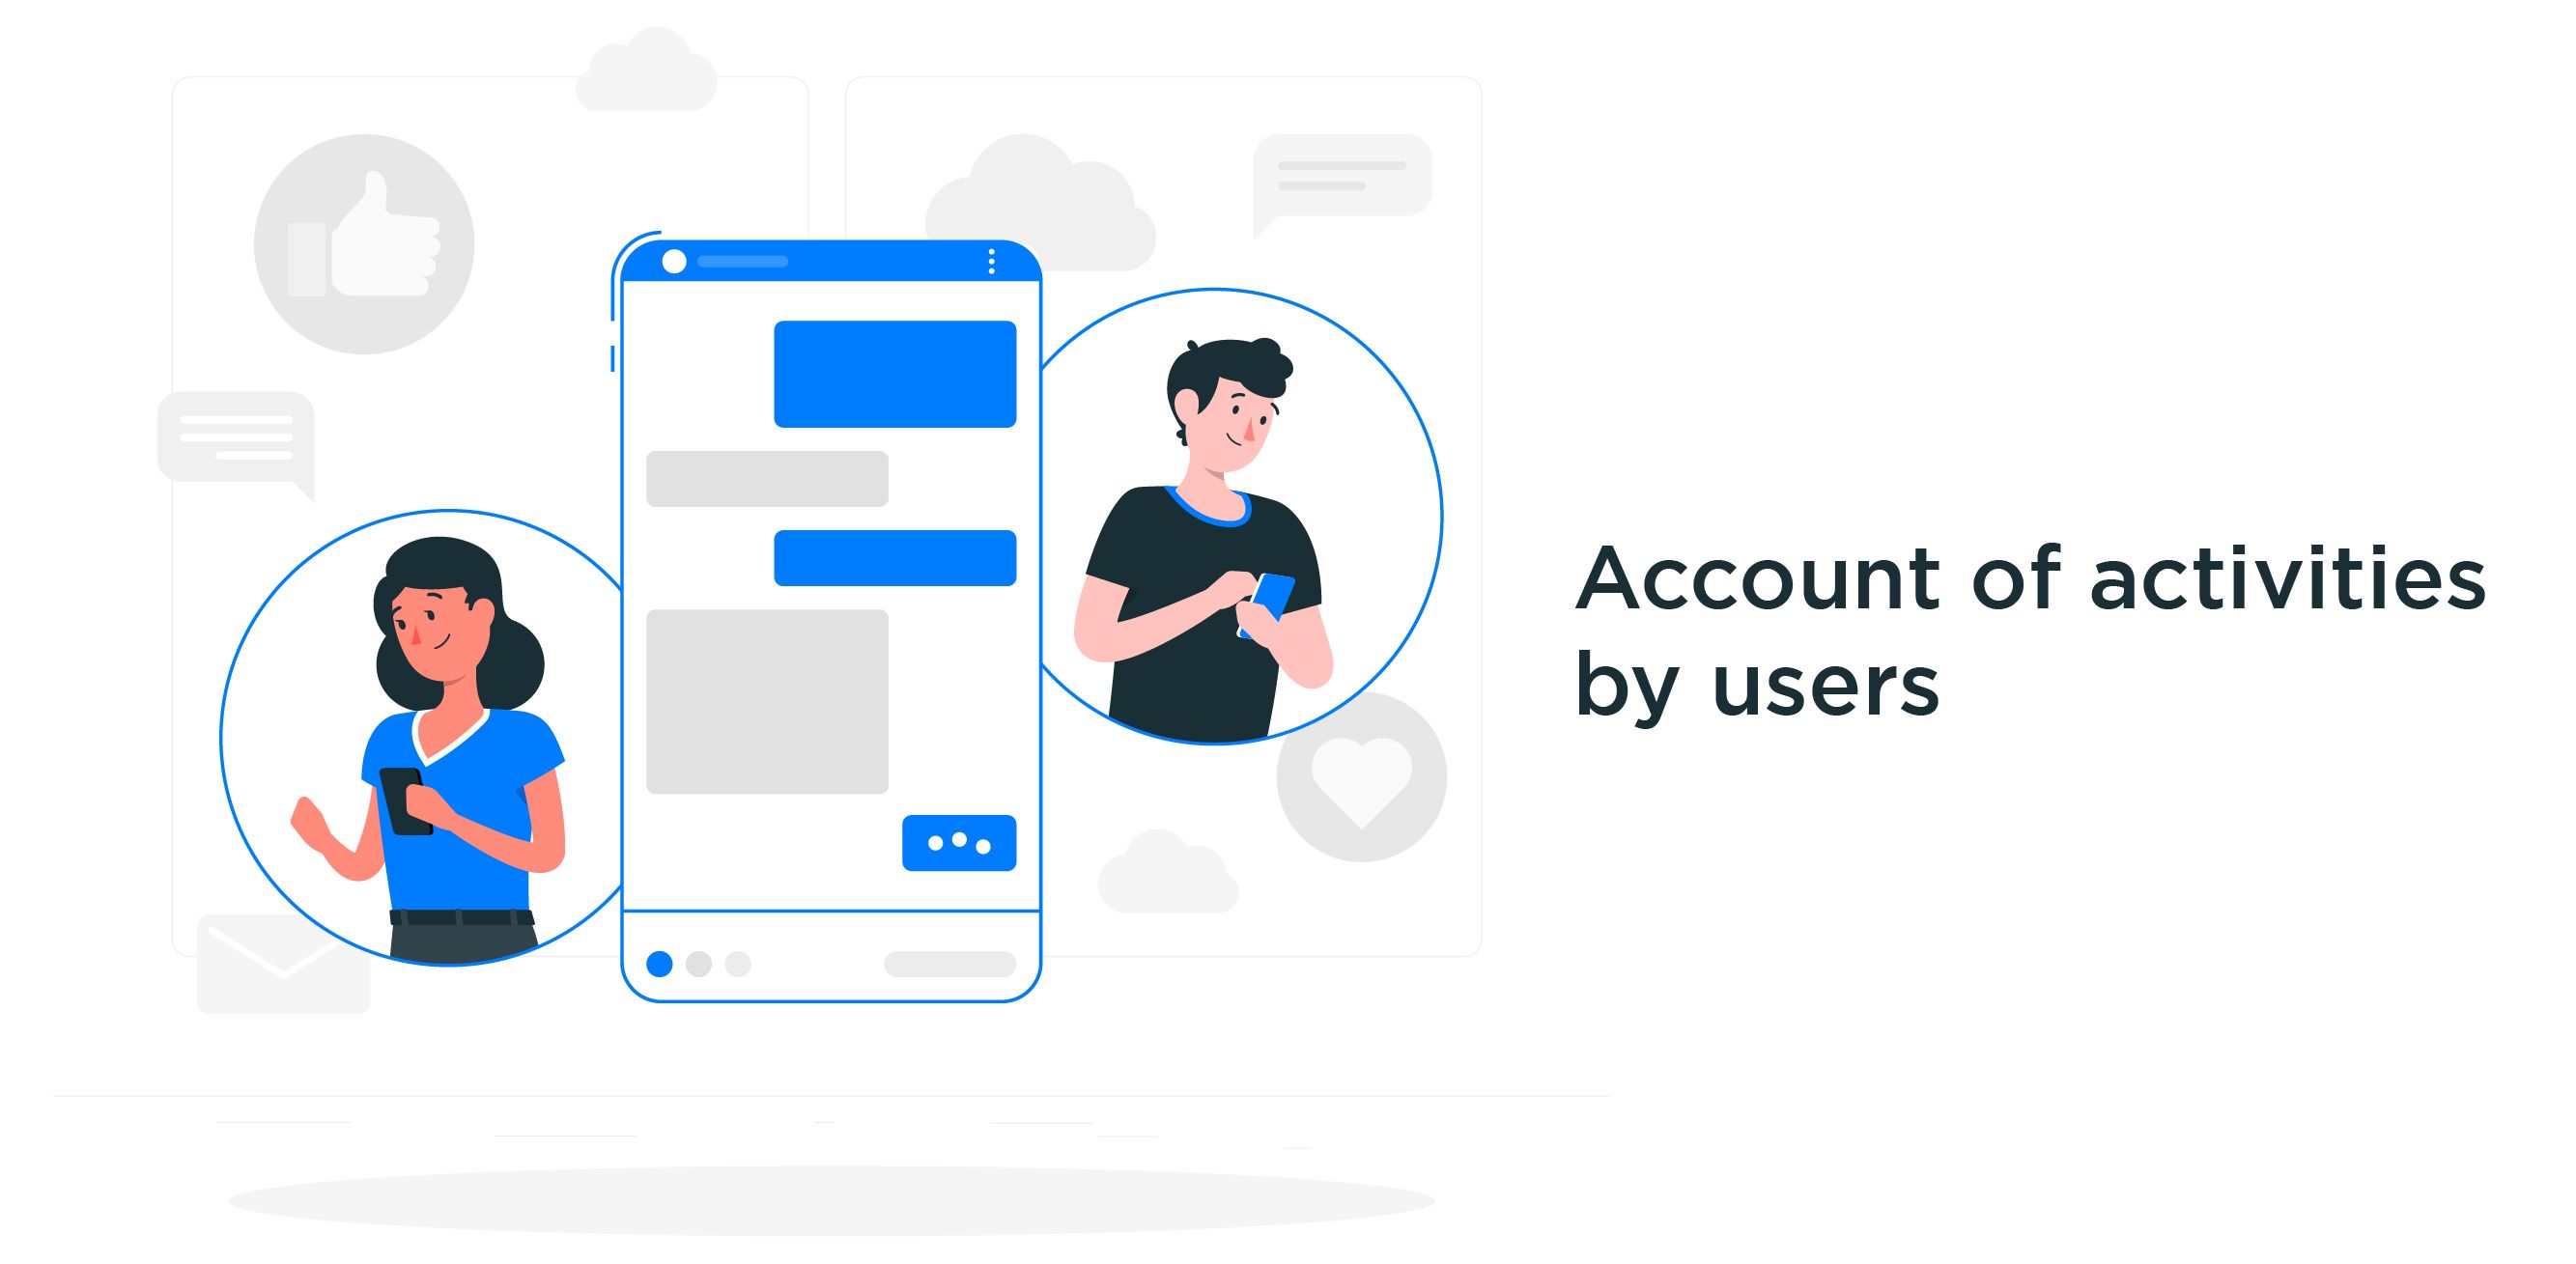 Account of activities by users